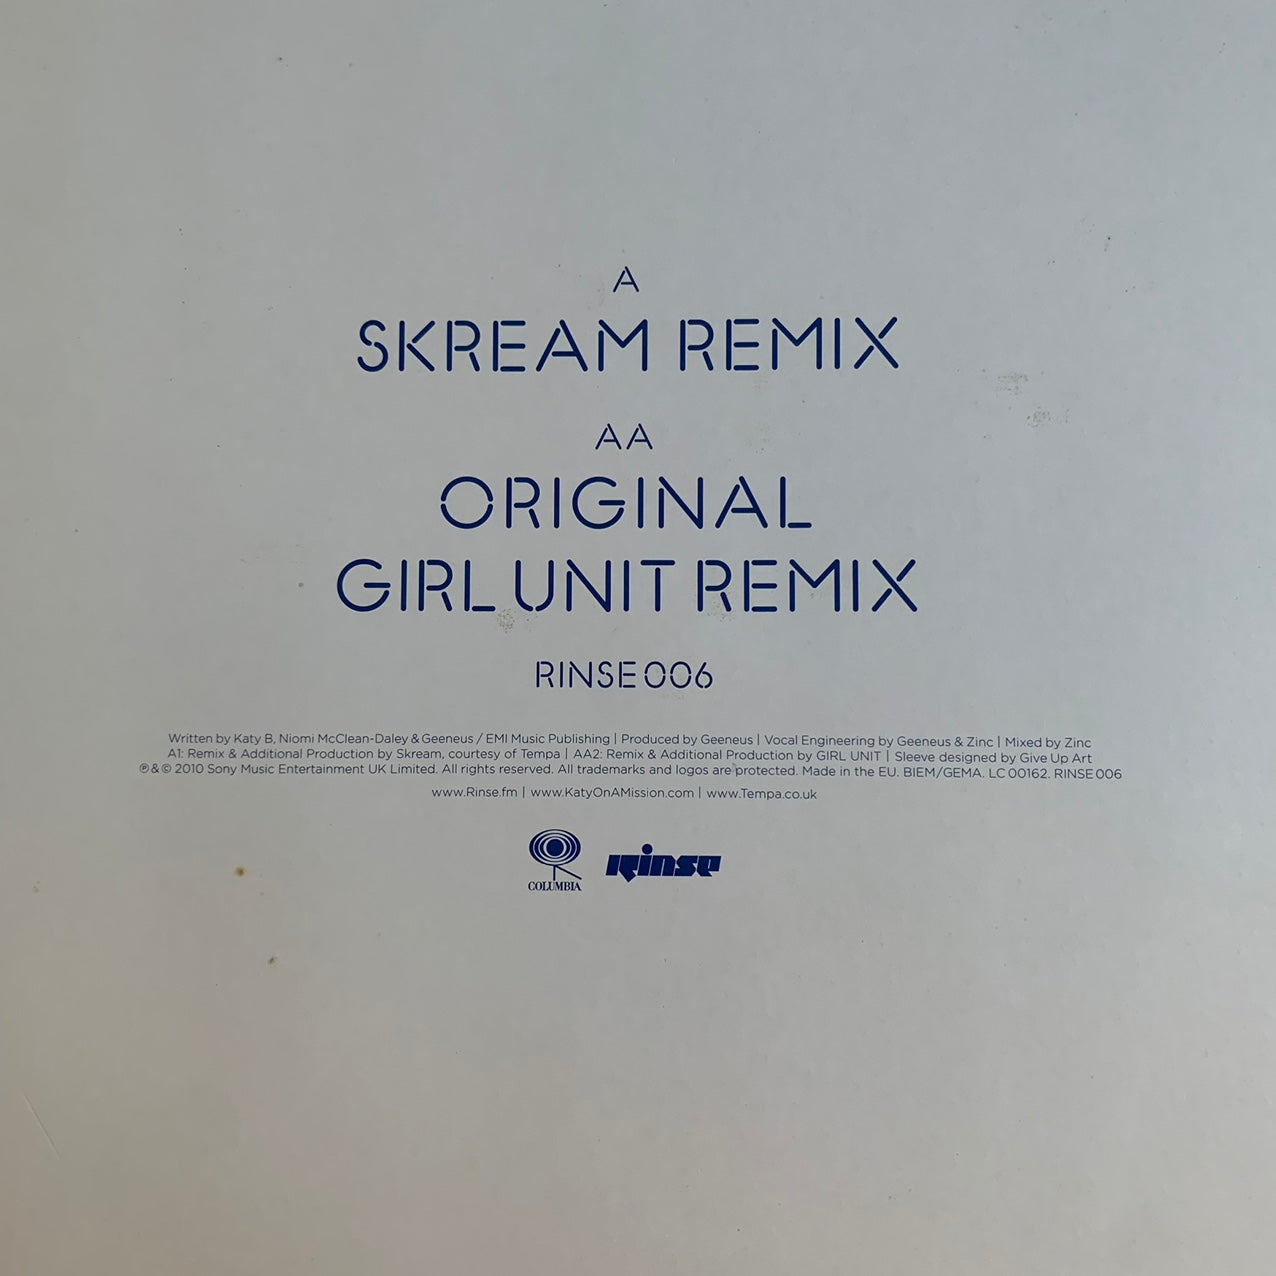 Katy B Feat Ms Dynamite “Lights On” 3 Version 12inch Vinyl, Featuring ‘Skream Remix, Original and Girl Unit Remix